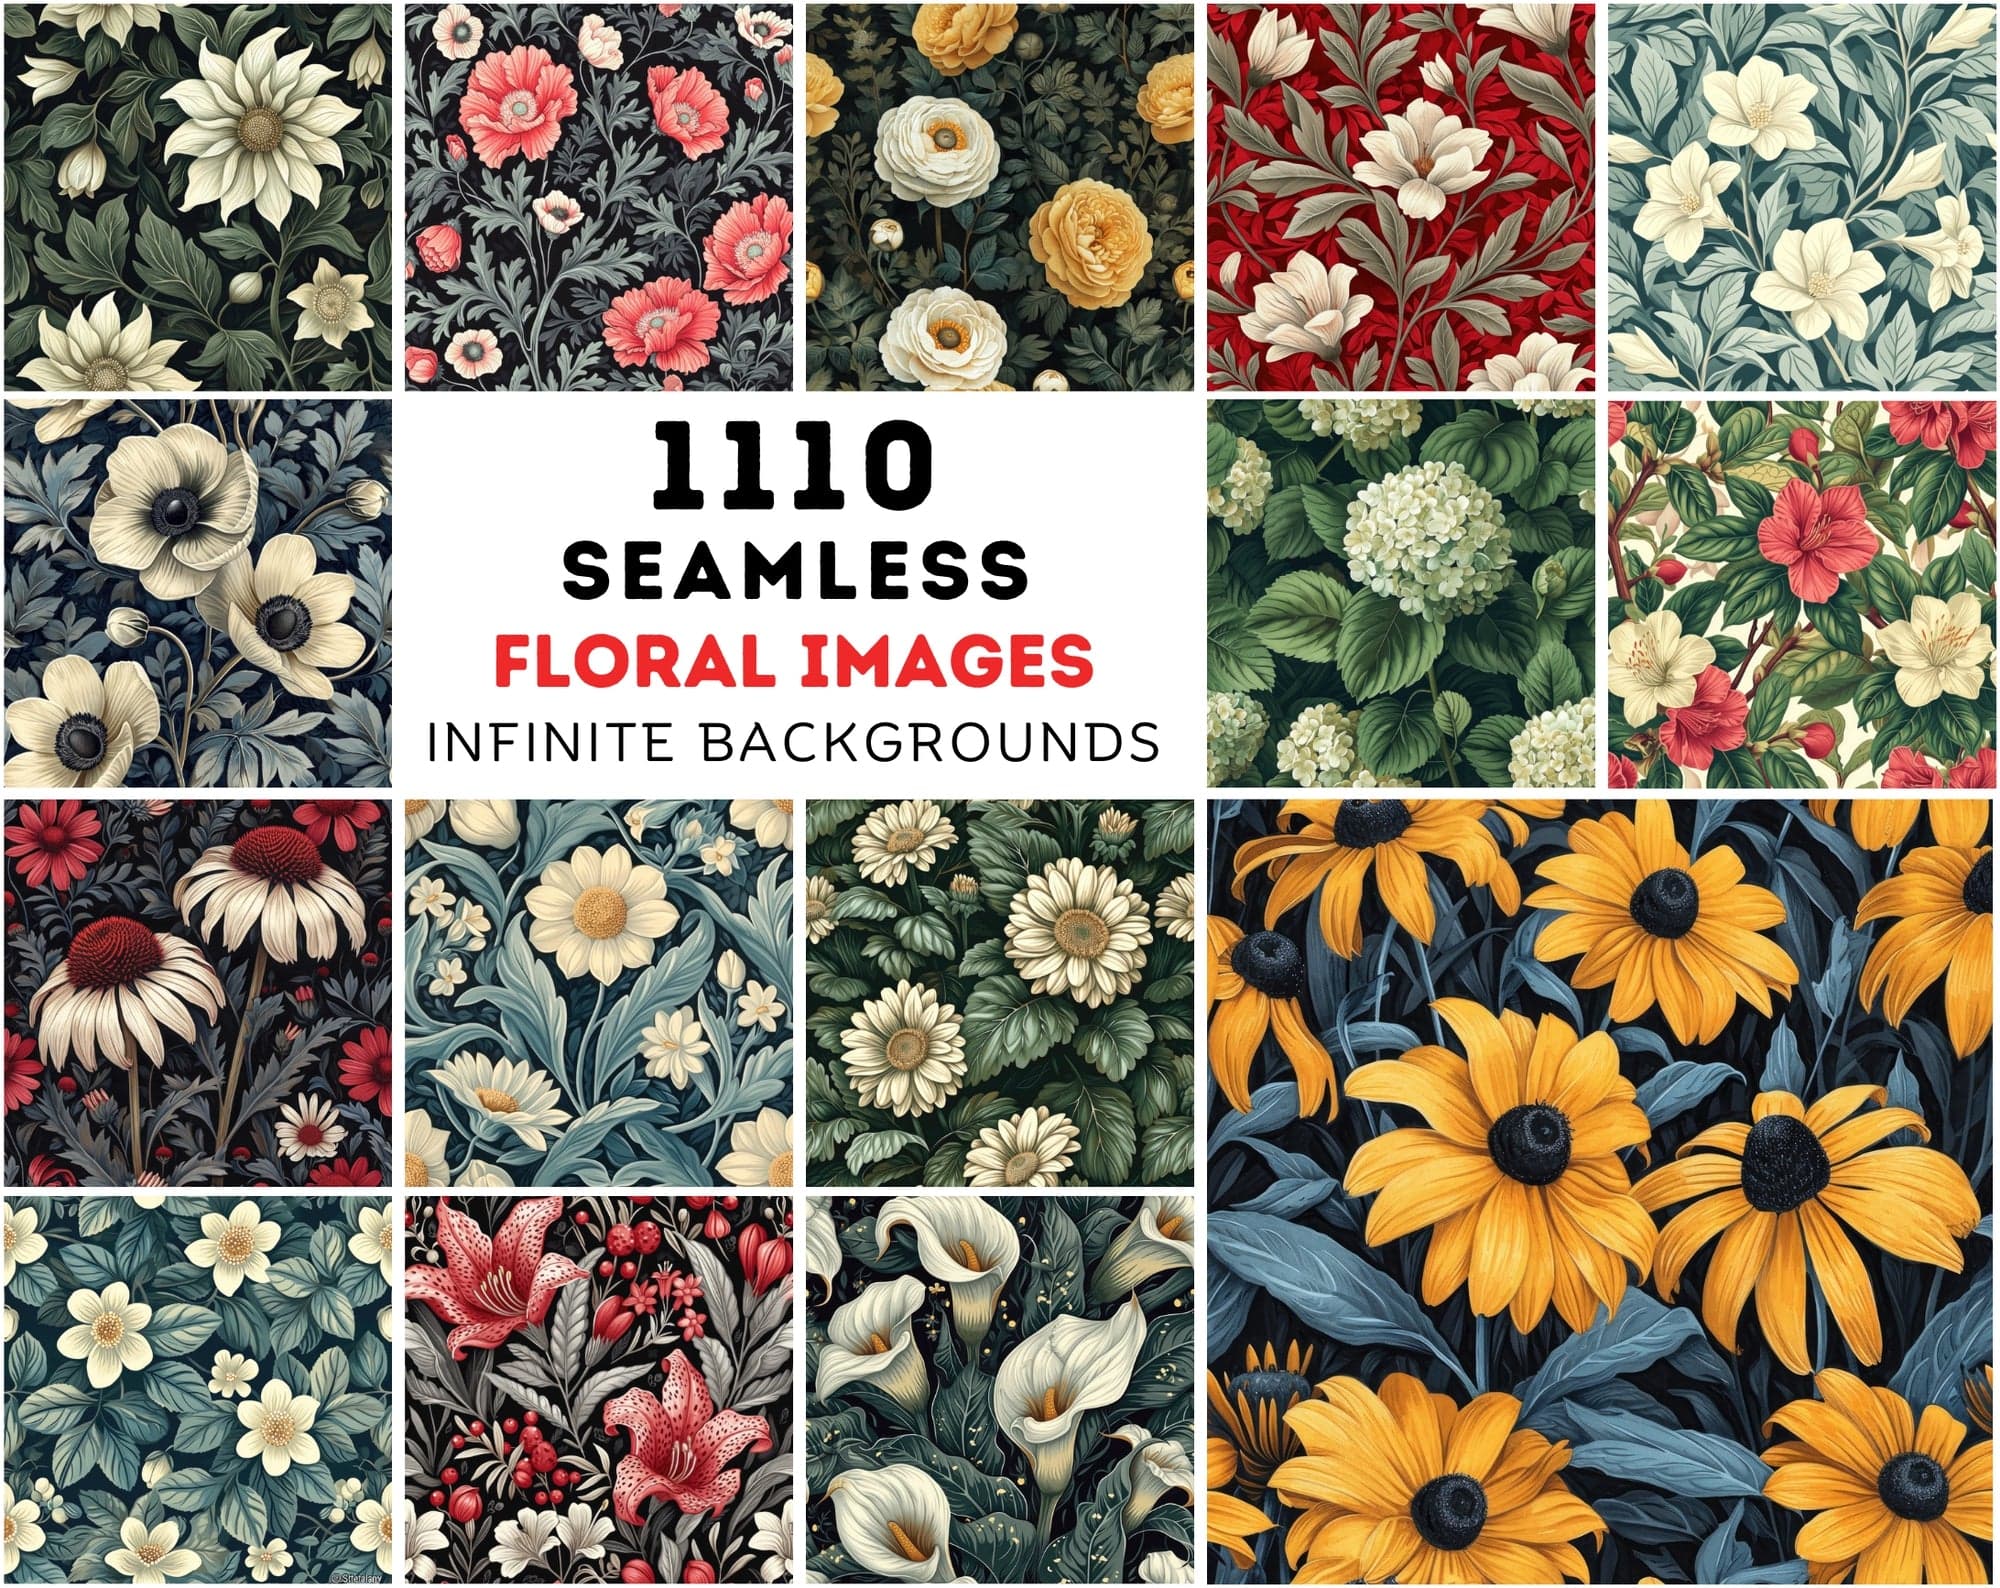 Floral Extravaganza: 1110 Seamless Patterns for Creative Design - High Resolution & Commercial Use Digital Download Sumobundle